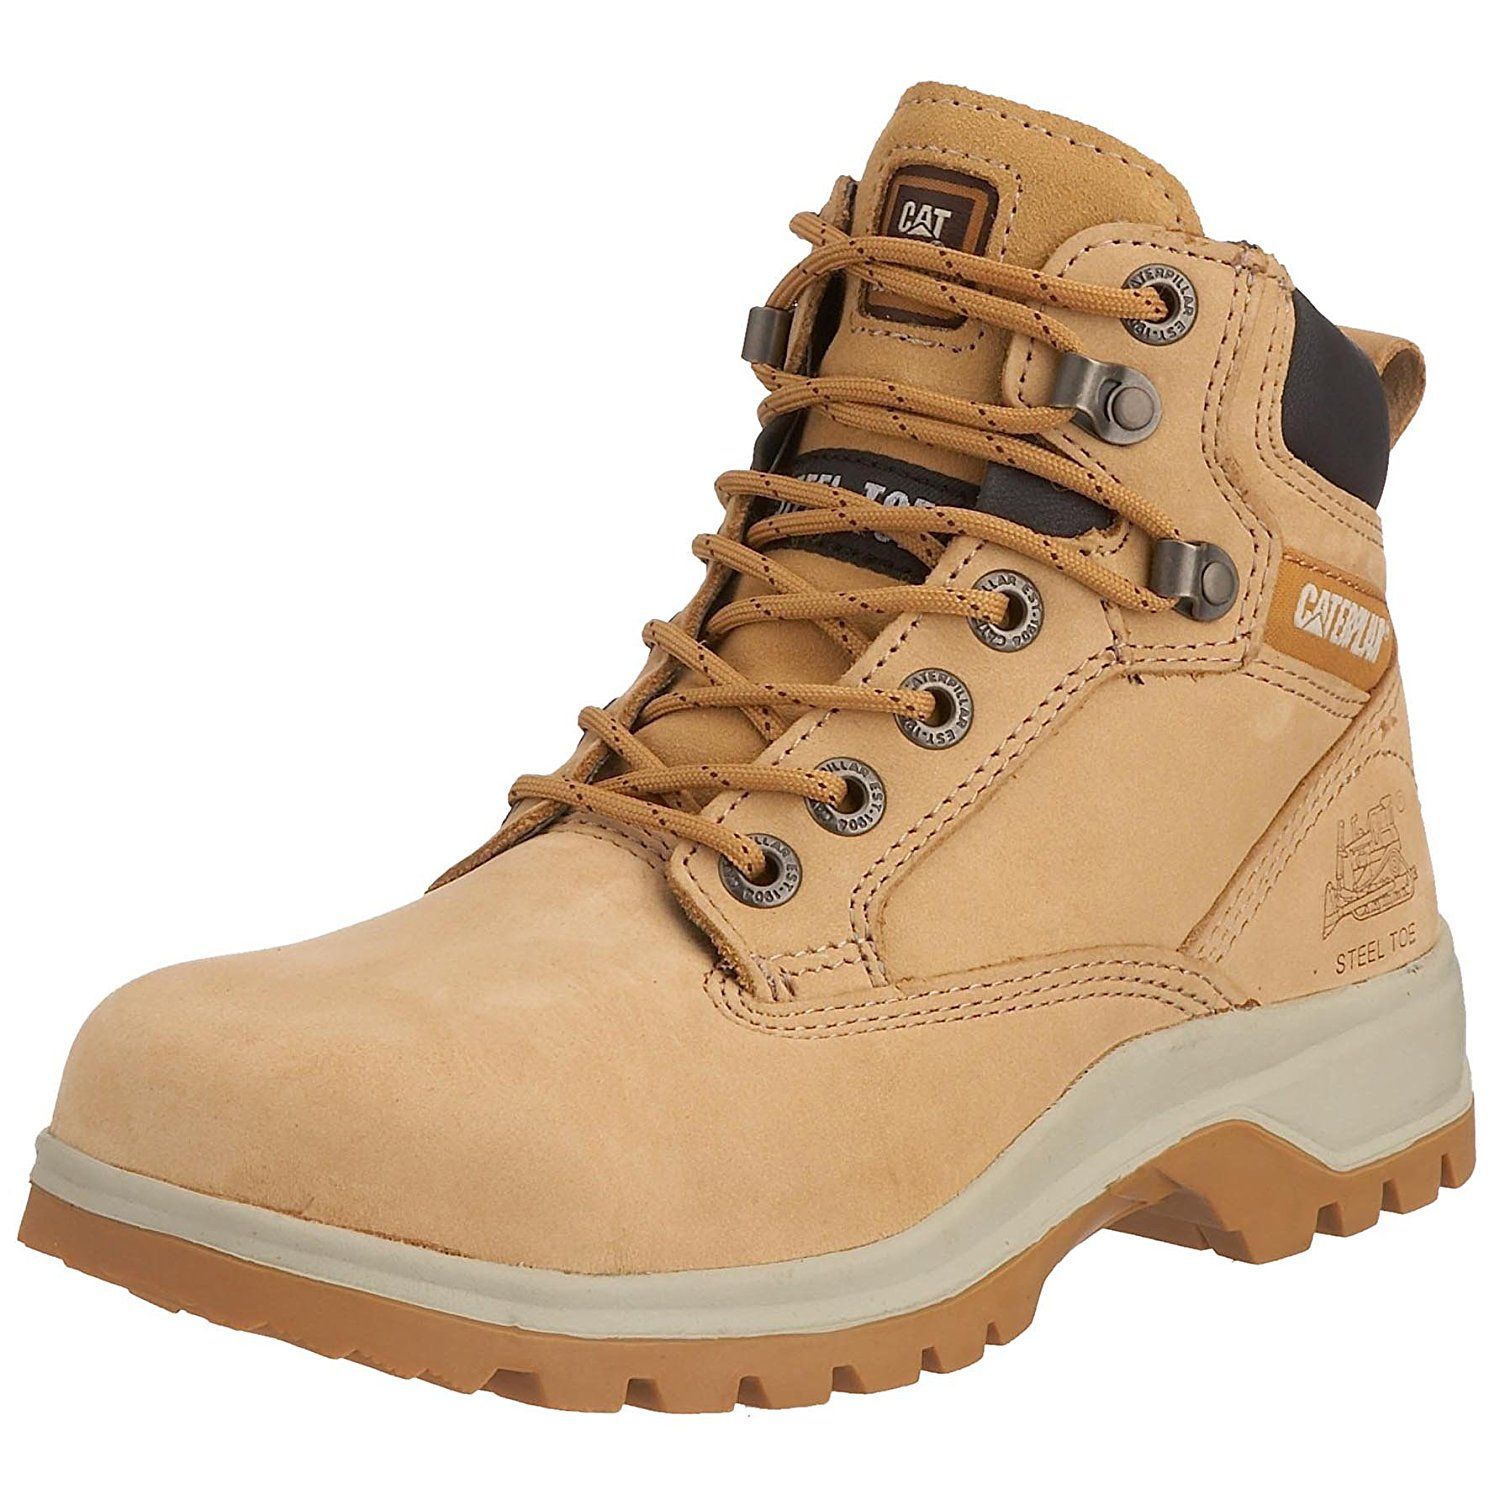 exegesis scout Thorns Caterpillar Seguridad Mujer Hotsell, 52% OFF | www.chine-magazine.com